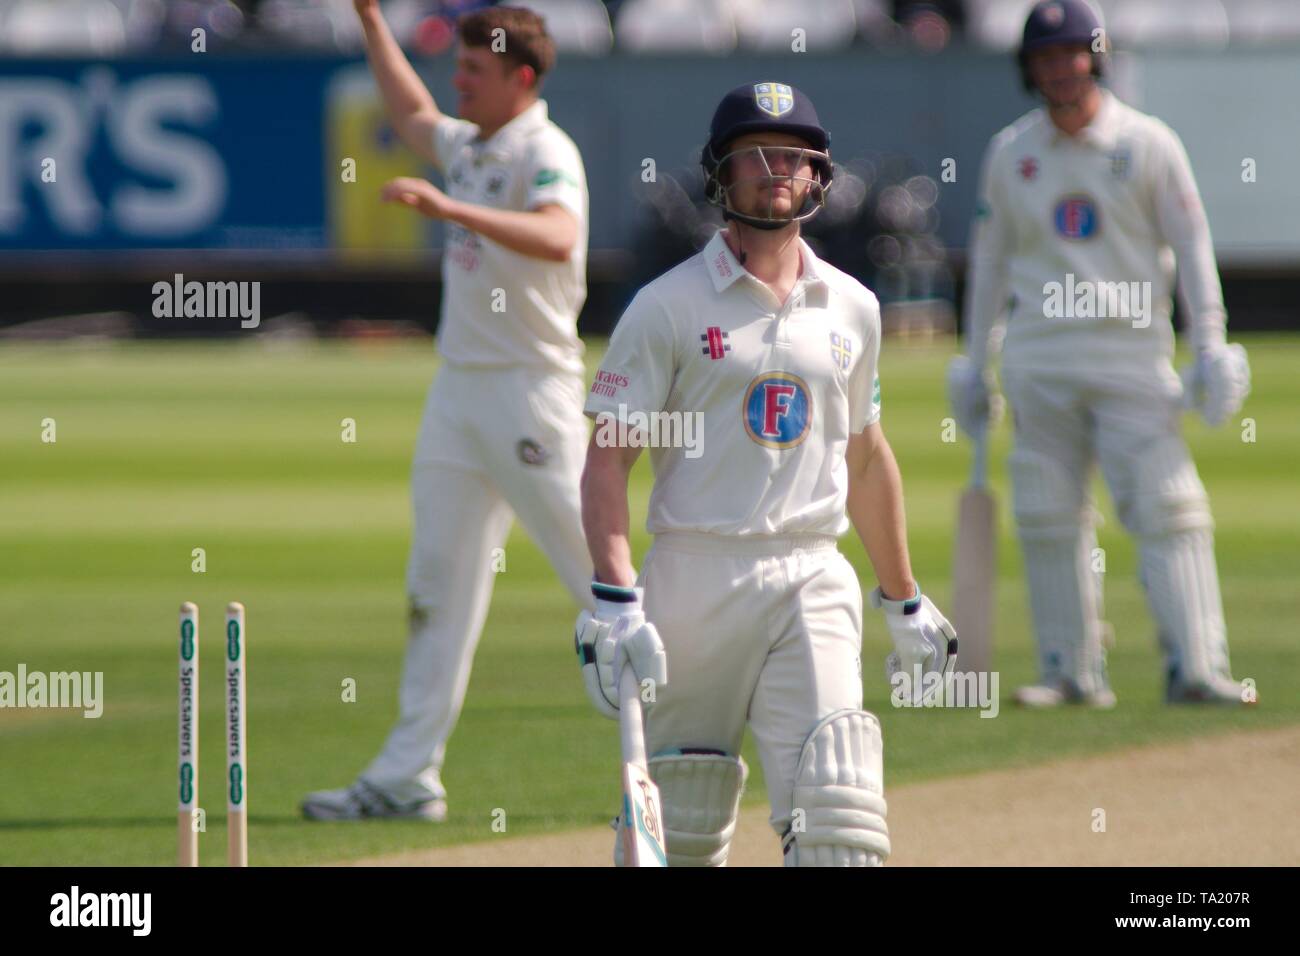 Chester le Street, England, 21 May 2019. Cameron Bancroft captain of Durham CCC leaving the field after being run out for 40 in the second innings against Gloucestershire CCC. The match was in the Specsavers County Championship Division 2 at the Emirates Riverside, Chester le Street. Stock Photo